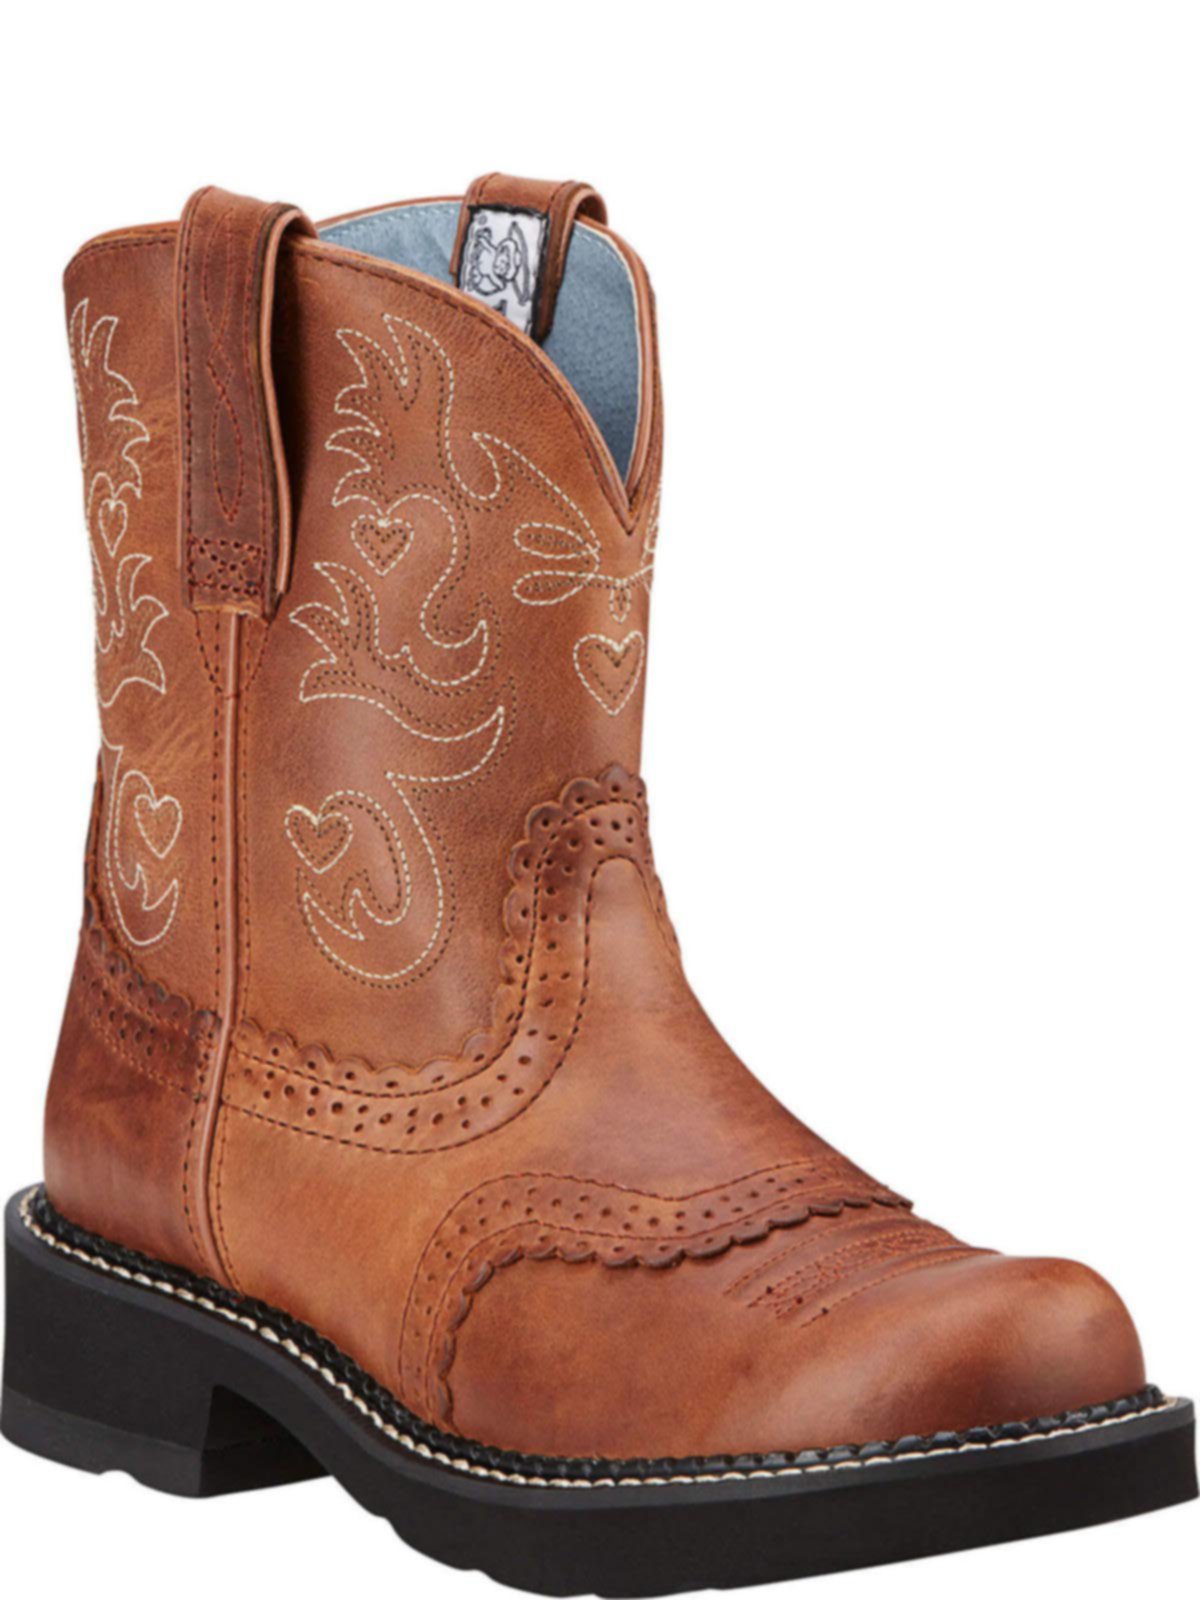 Shop Ariat Womens Fatbaby Saddle Western Boot 10000860 | Save 25% + Free Shipping | BootAmerica